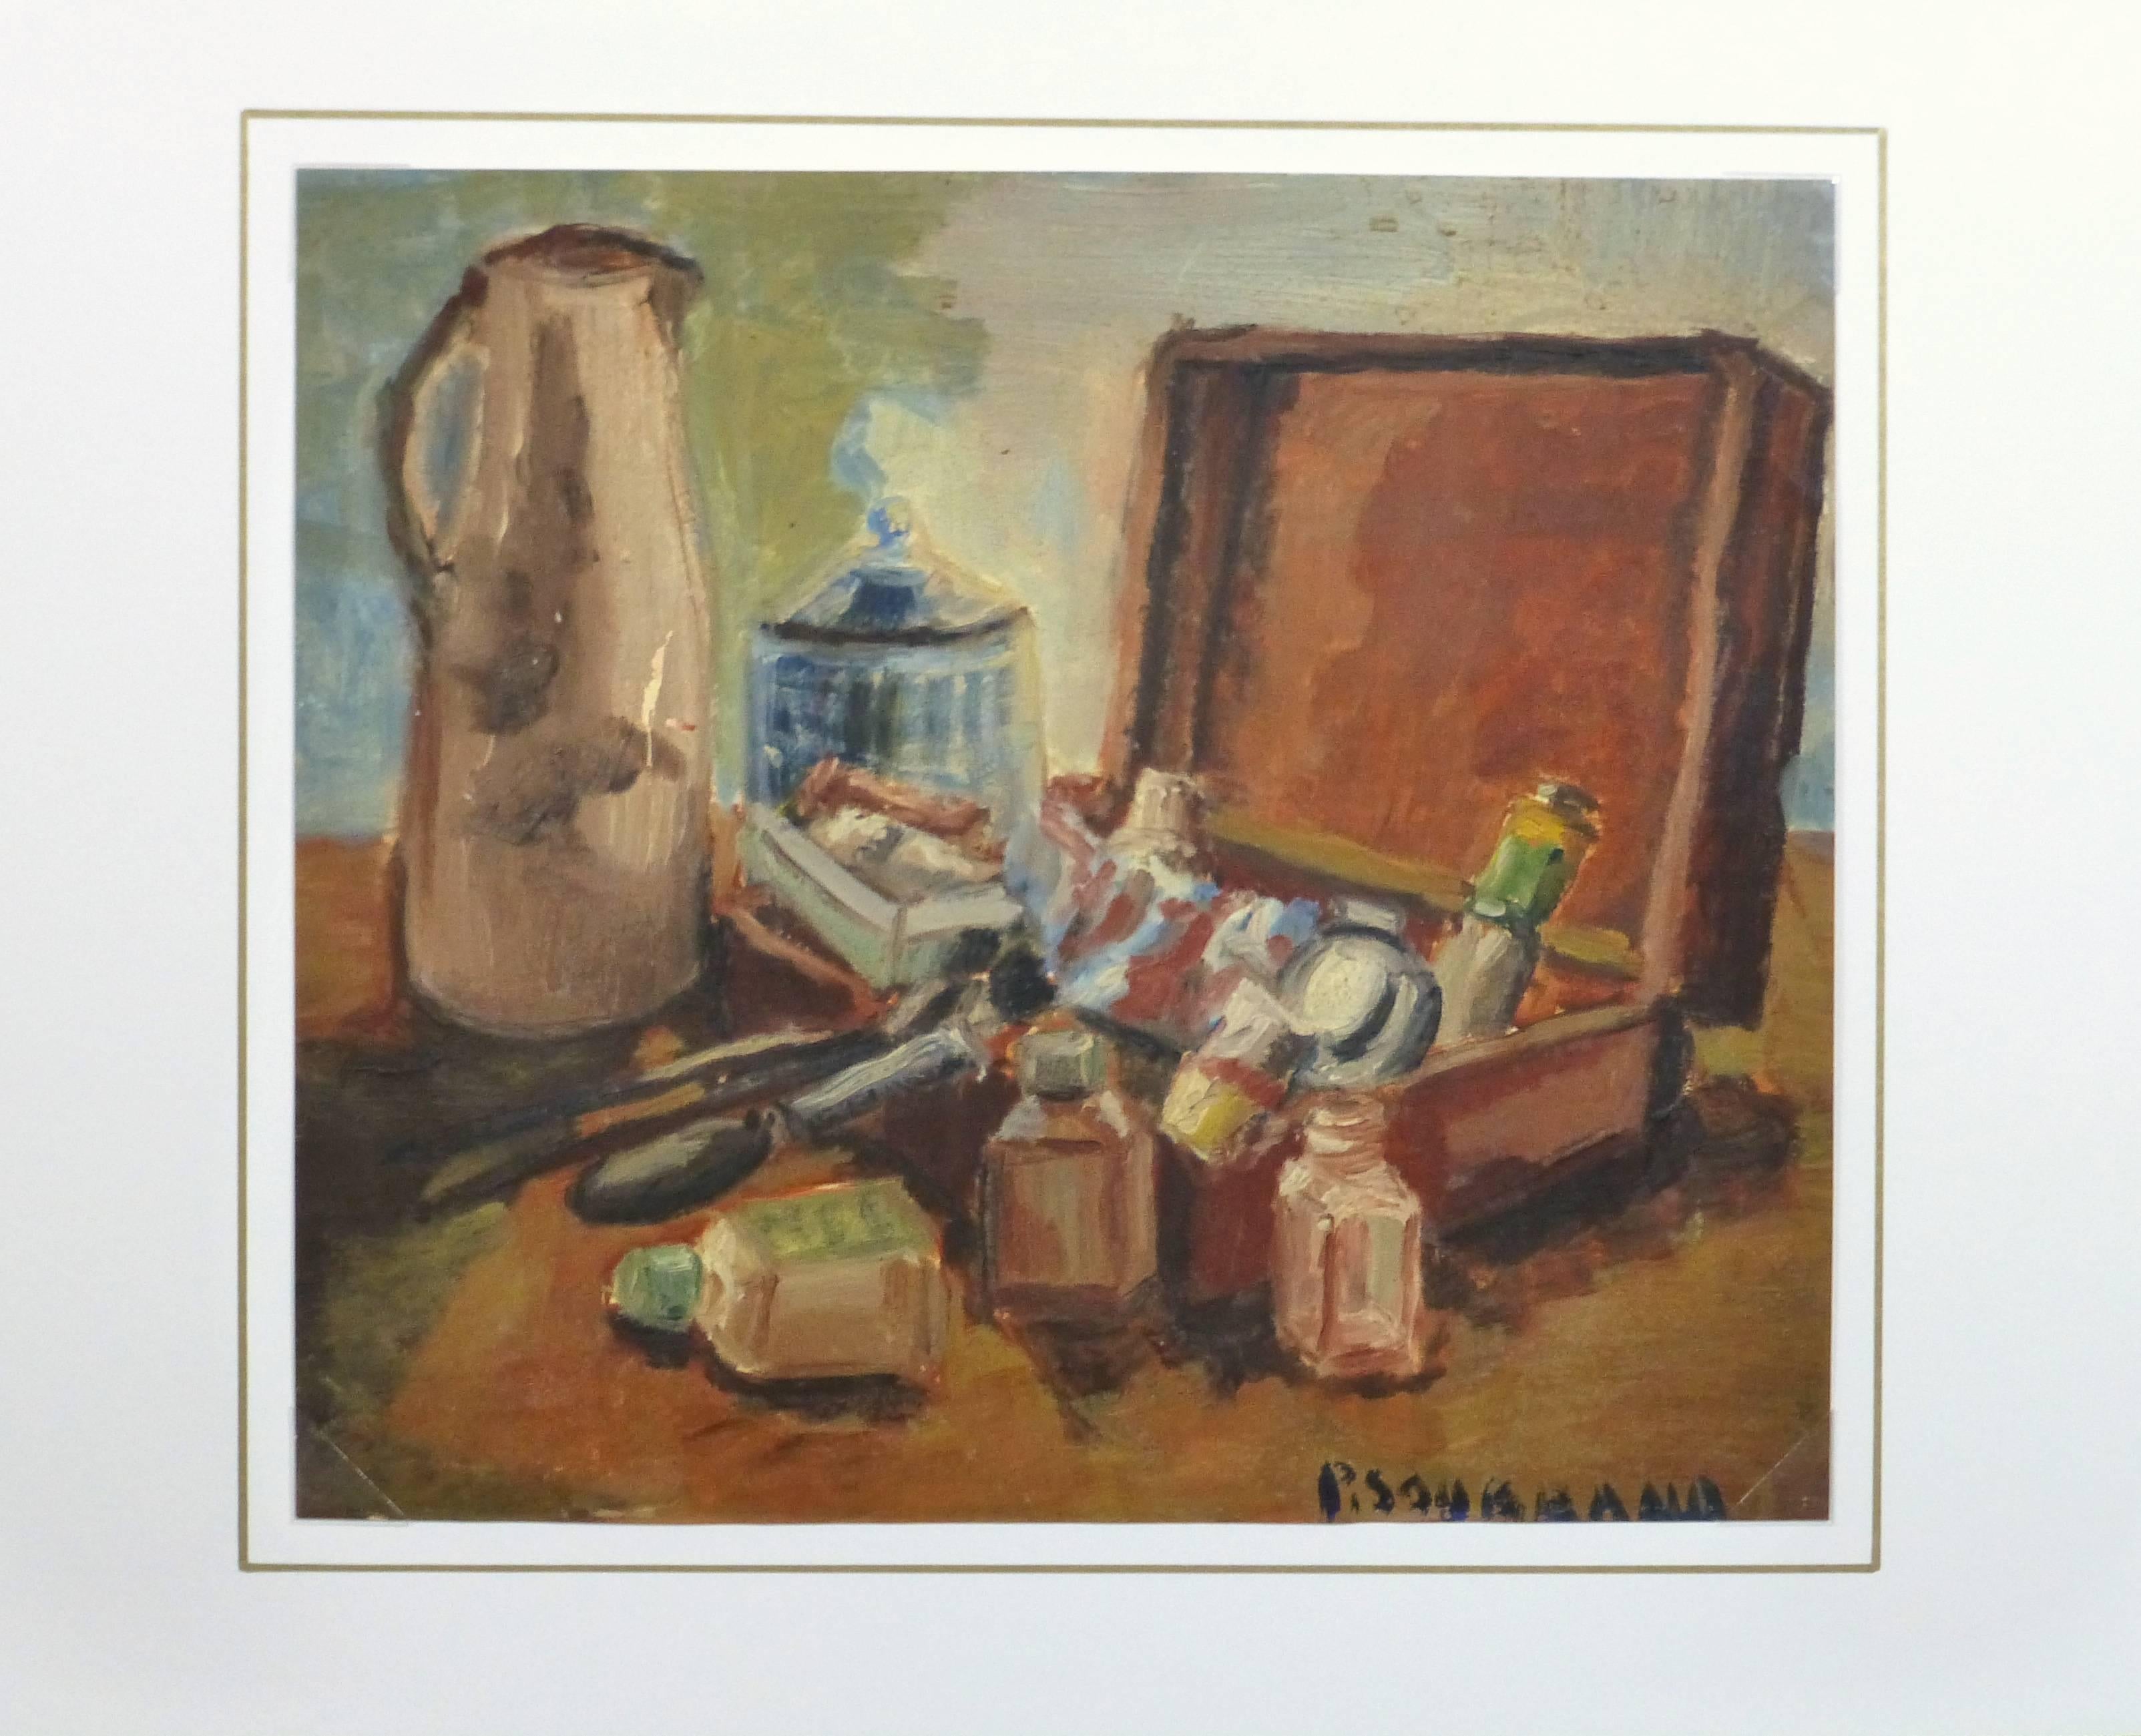 Warmly hued oil on paper still life of open wooden box with artist's supplies spilling out, circa 1930. Signiert unten rechts. 

Original artwork on paper displayed on a white mat with a gold border. Mat fits a standard-size frame. Archival plastic